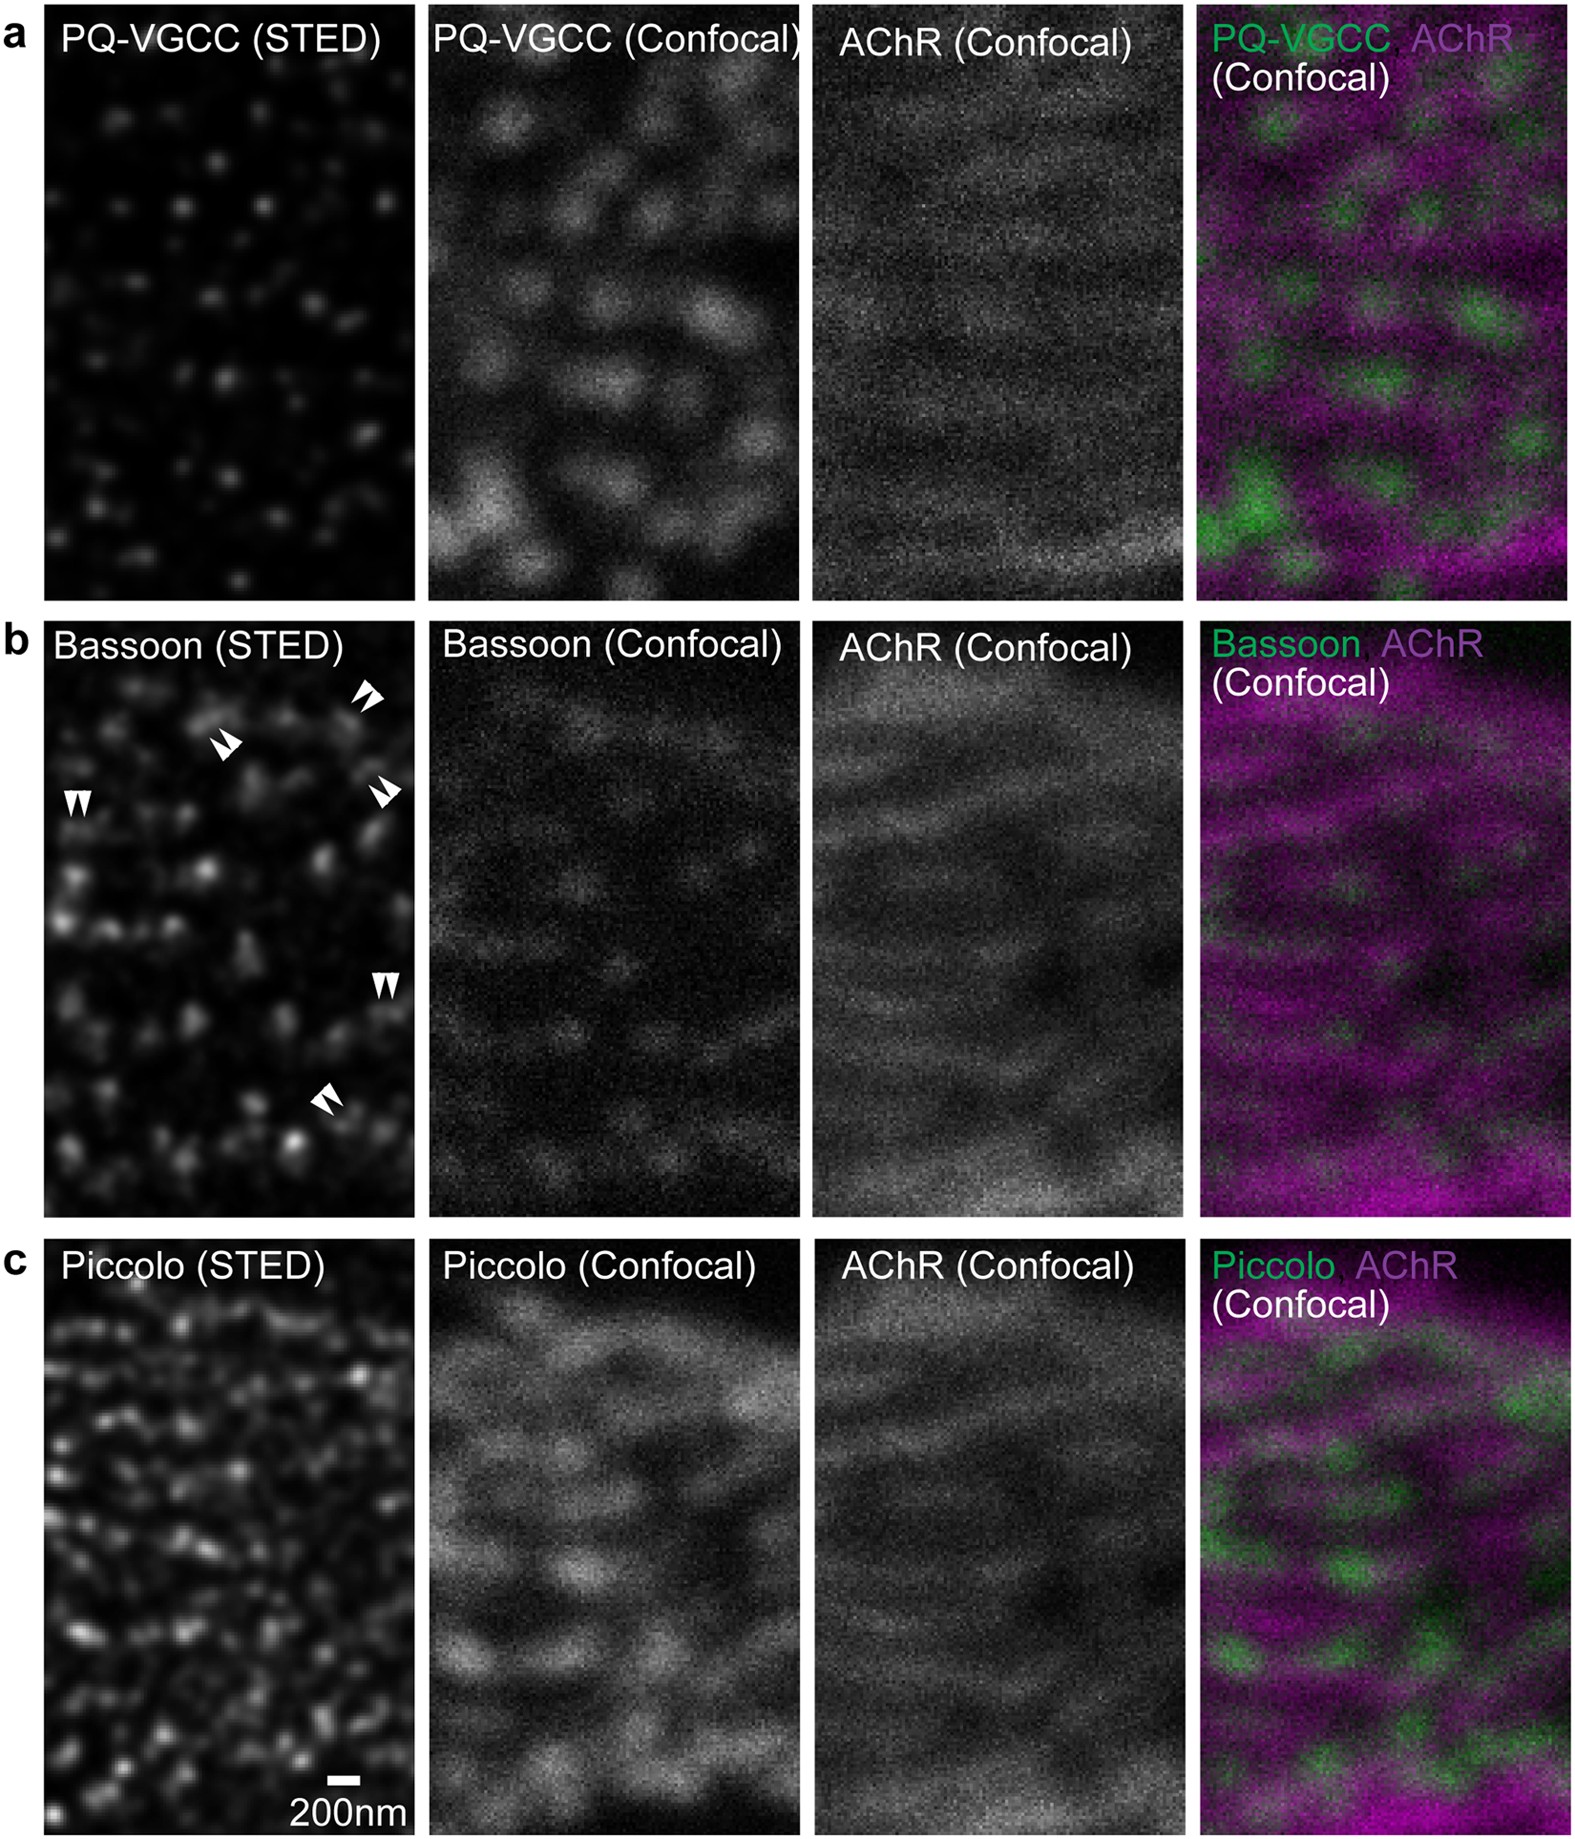 Dual-color STED microscopy reveals a sandwich structure of Bassoon and  Piccolo in active zones of adult and aged mice | Scientific Reports